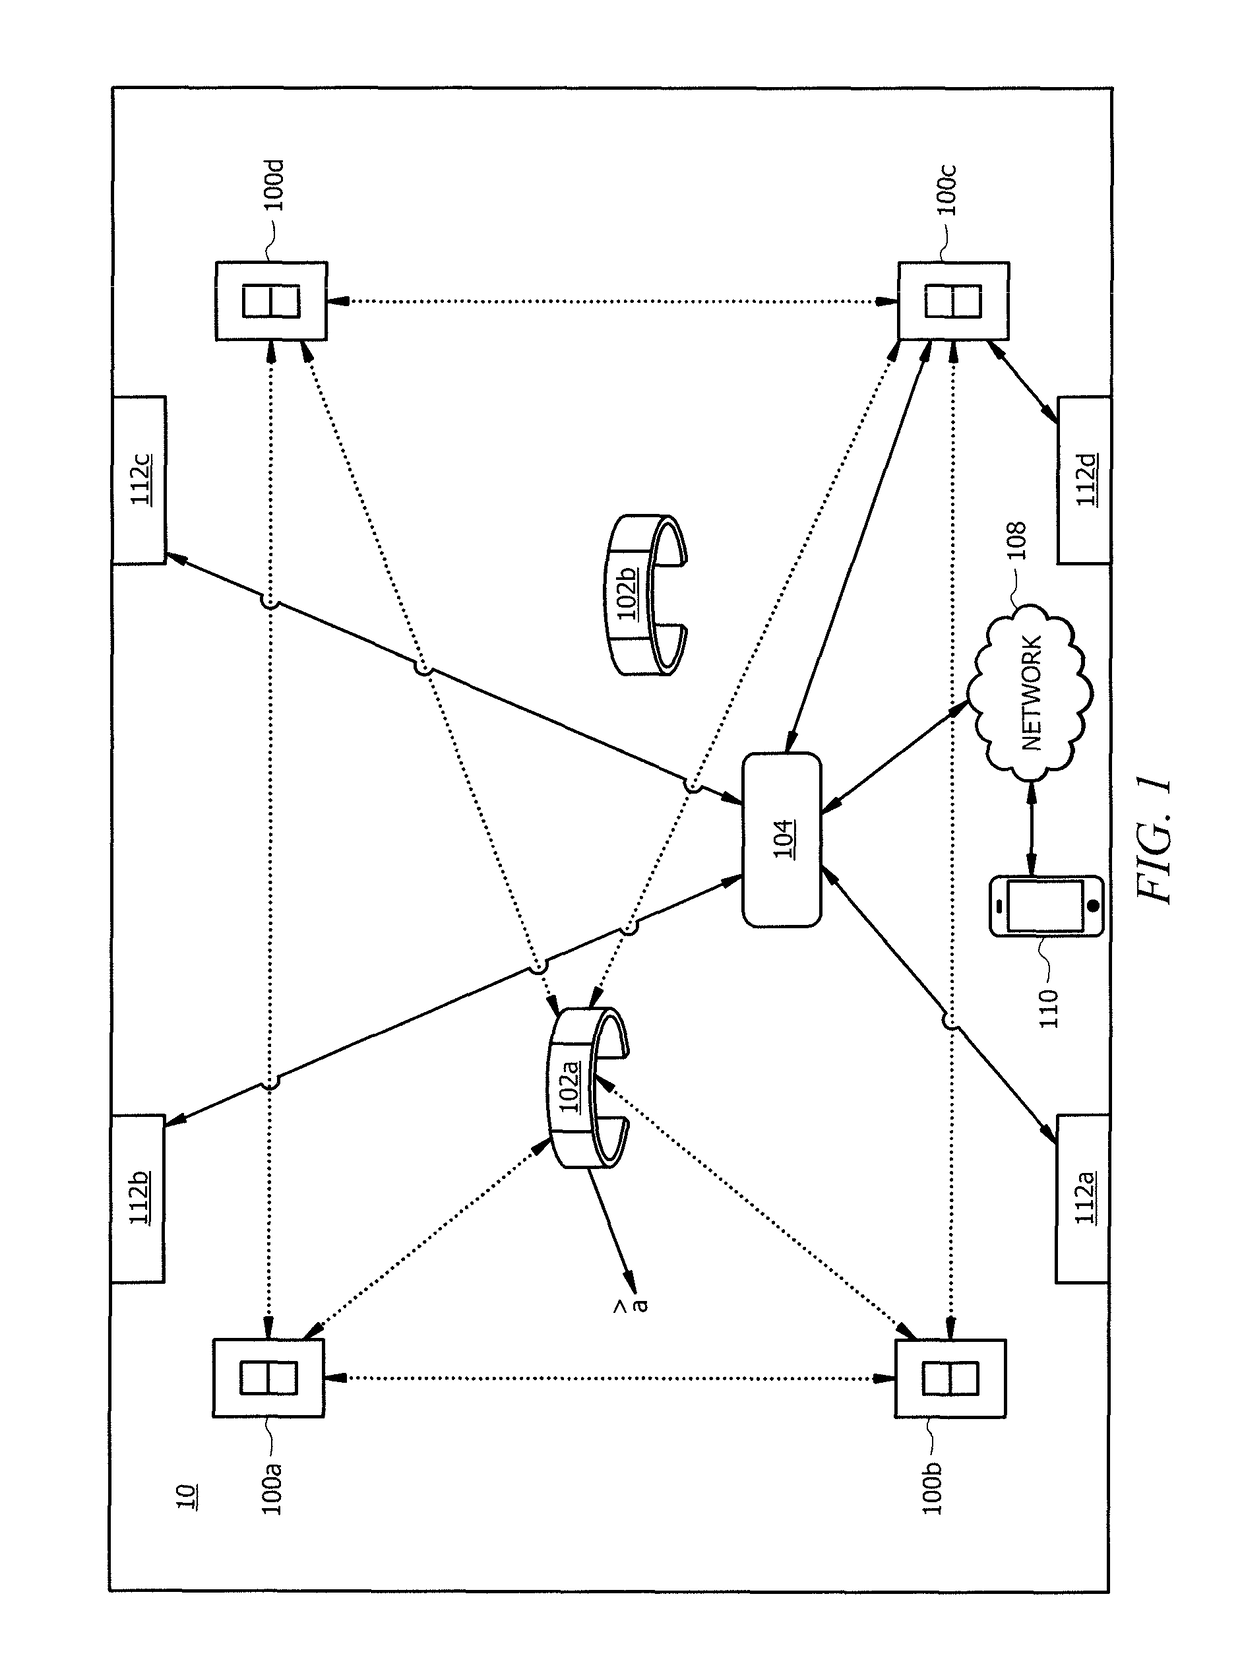 Indoor position and vector tracking system and method